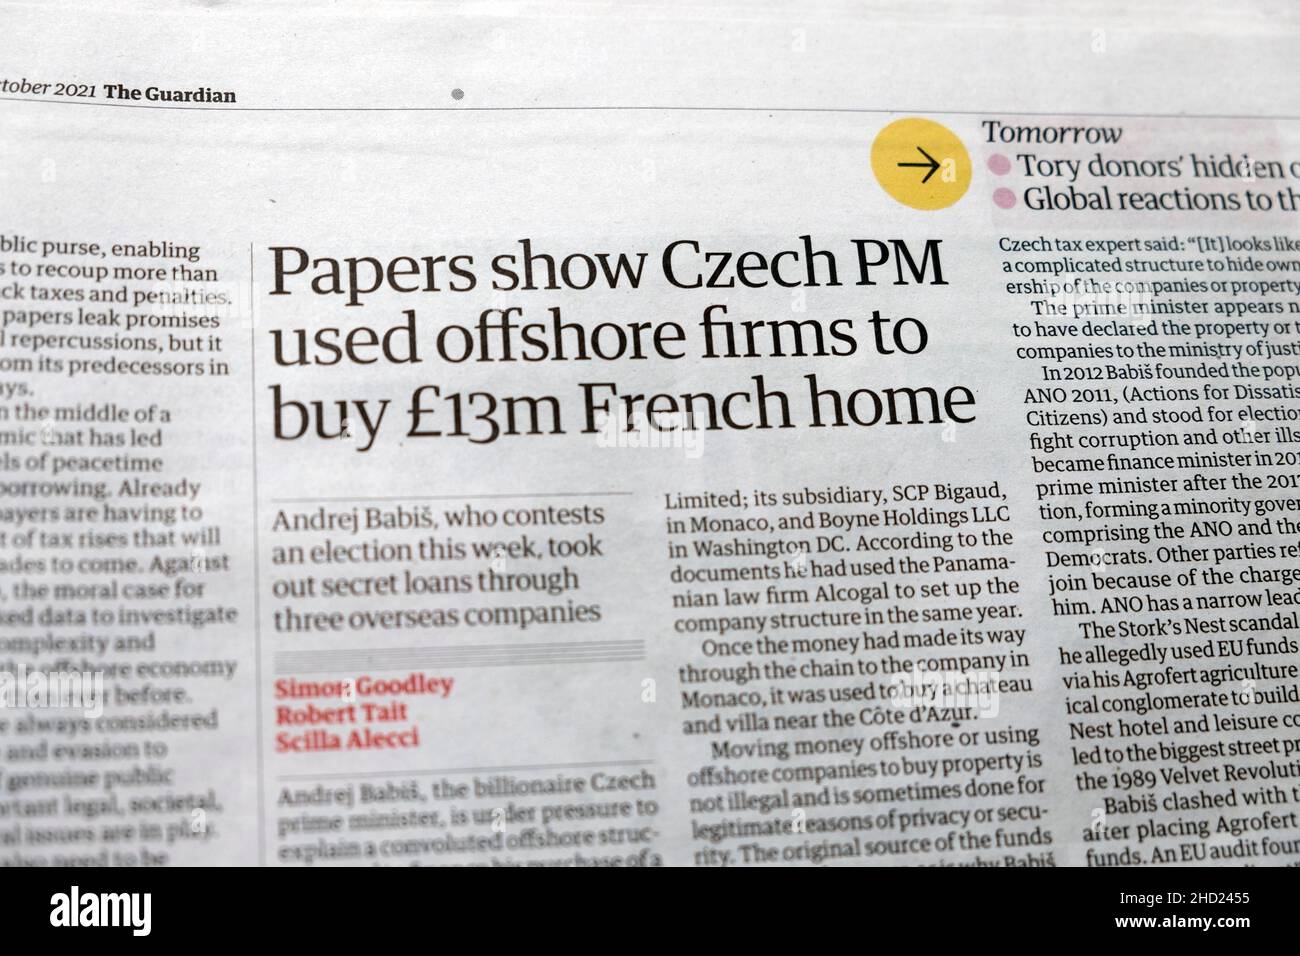 papers show czech pm used offshore firms to buy 13m french home pandora papers guardian newspaper headline article clipping october 2021 london uk 2HD2455